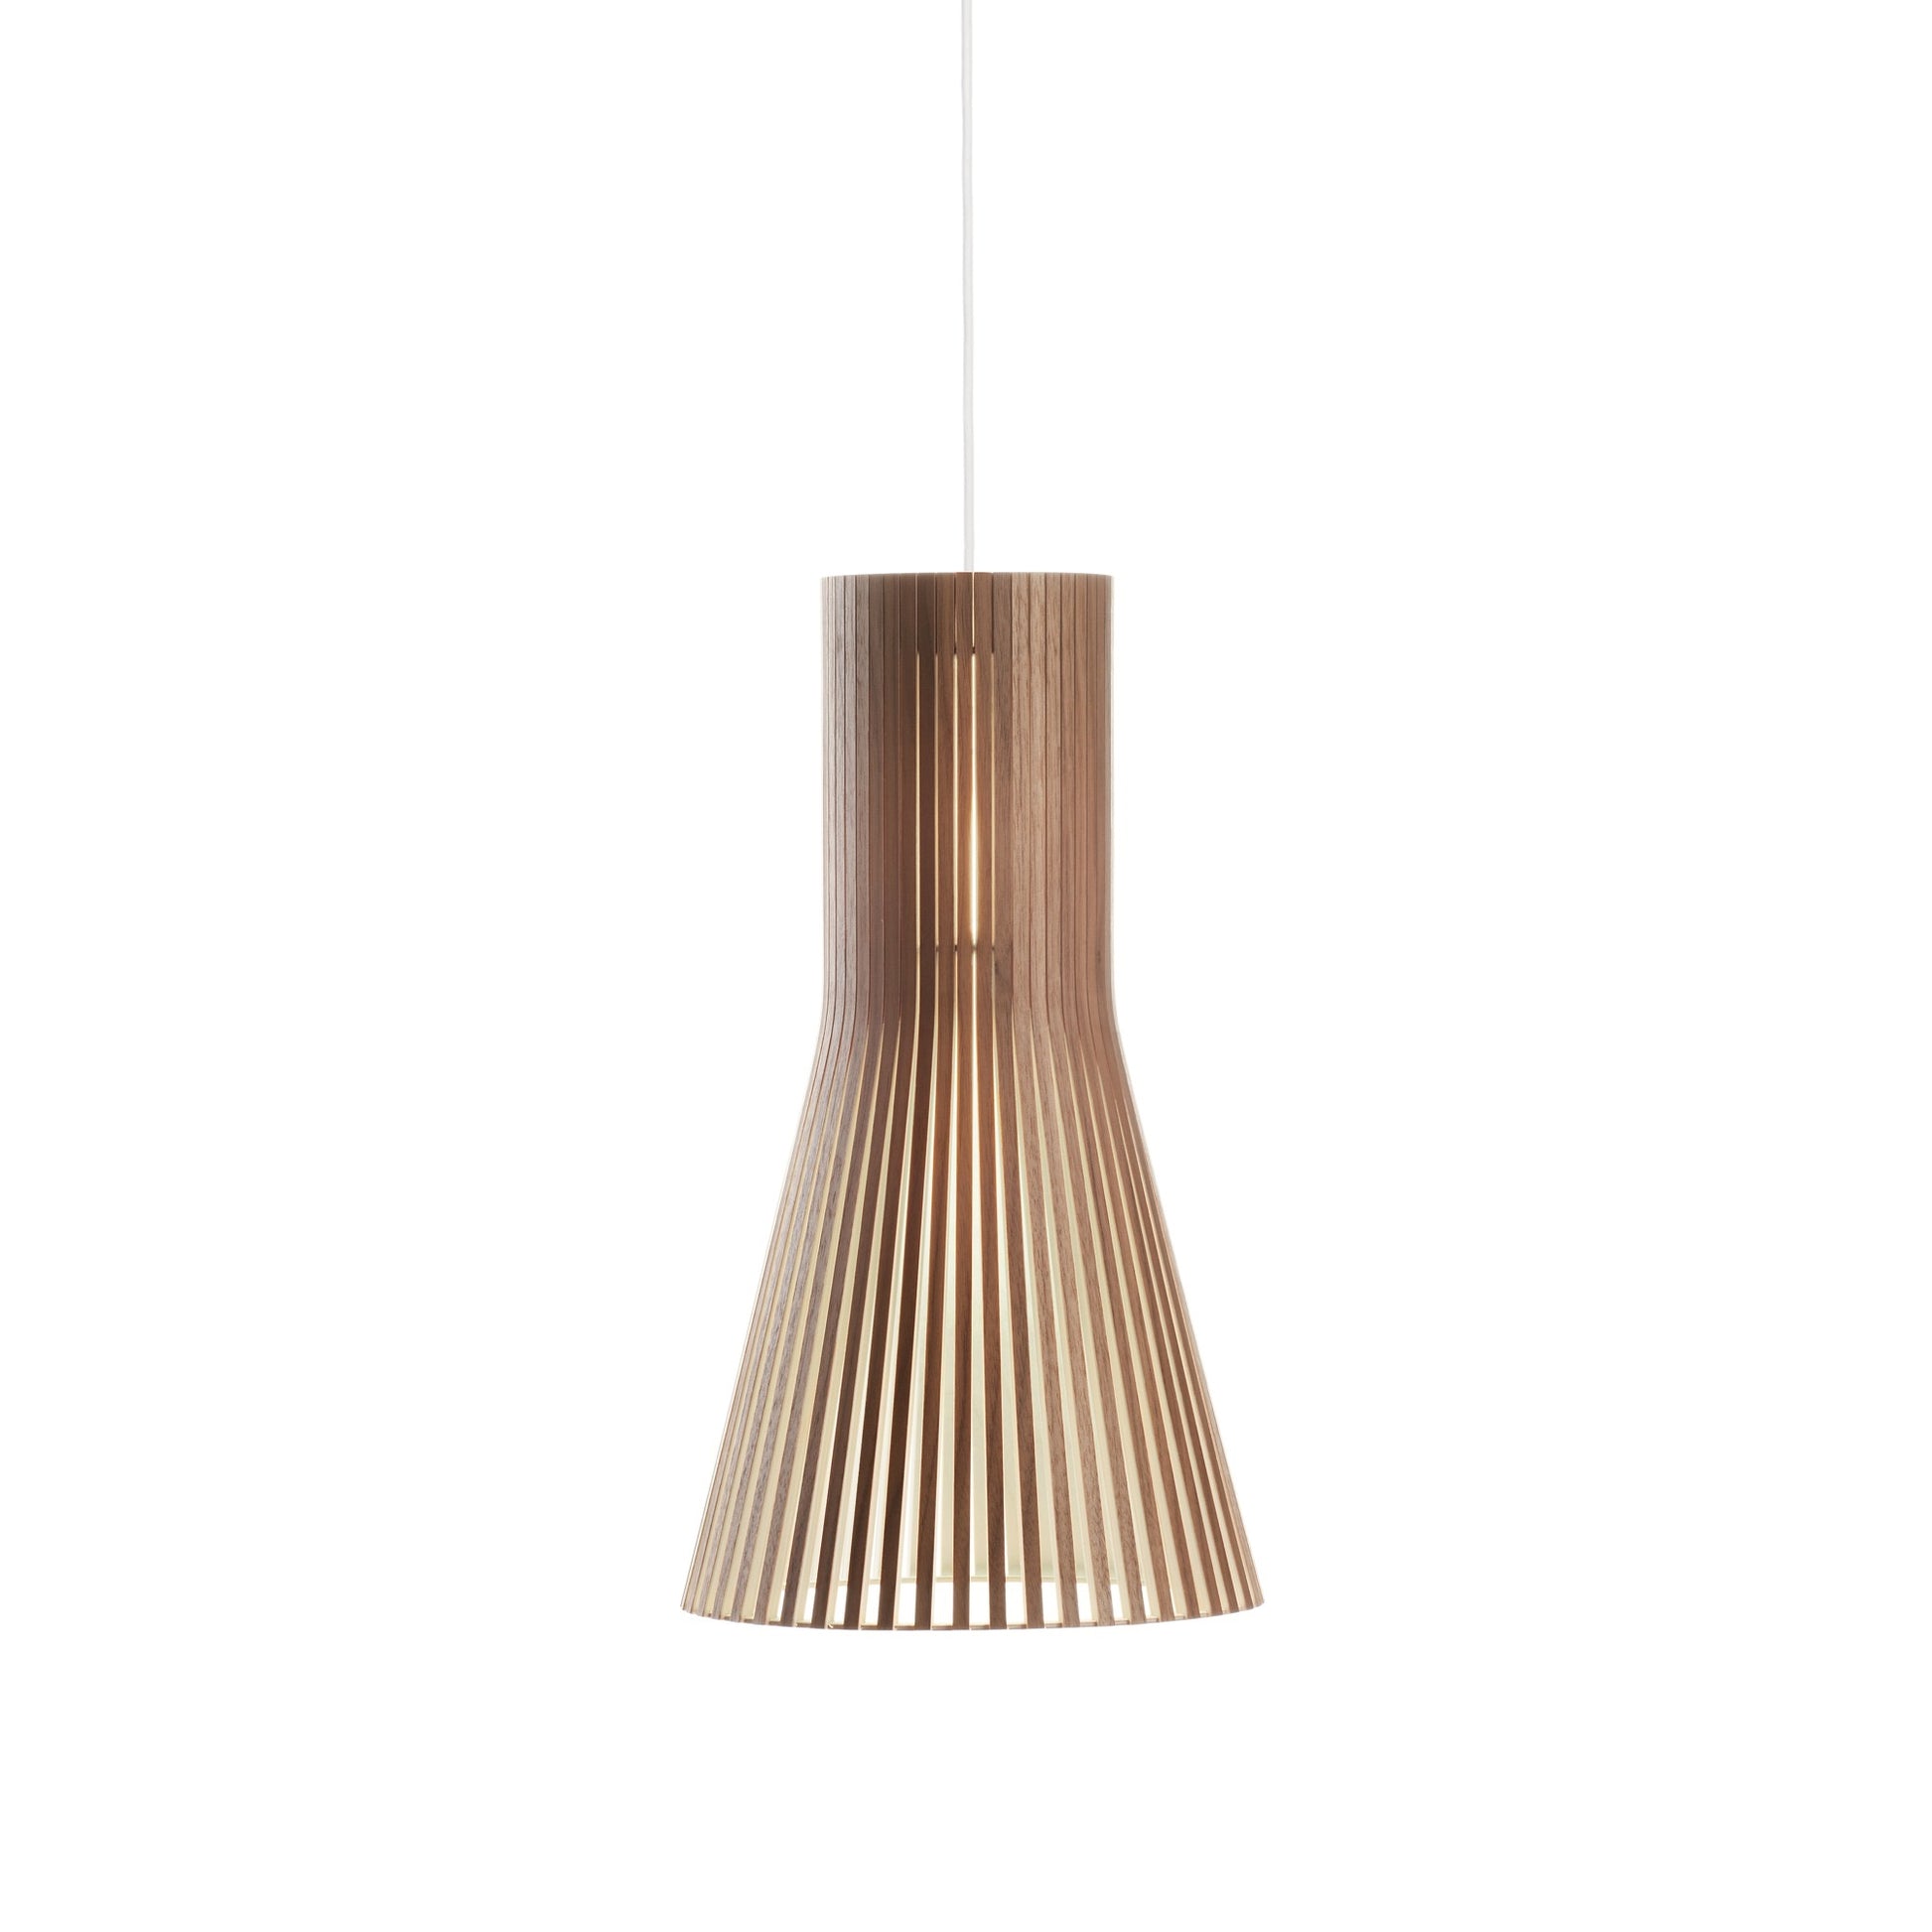 4201 Pendant Lamp by Secto #Walnut